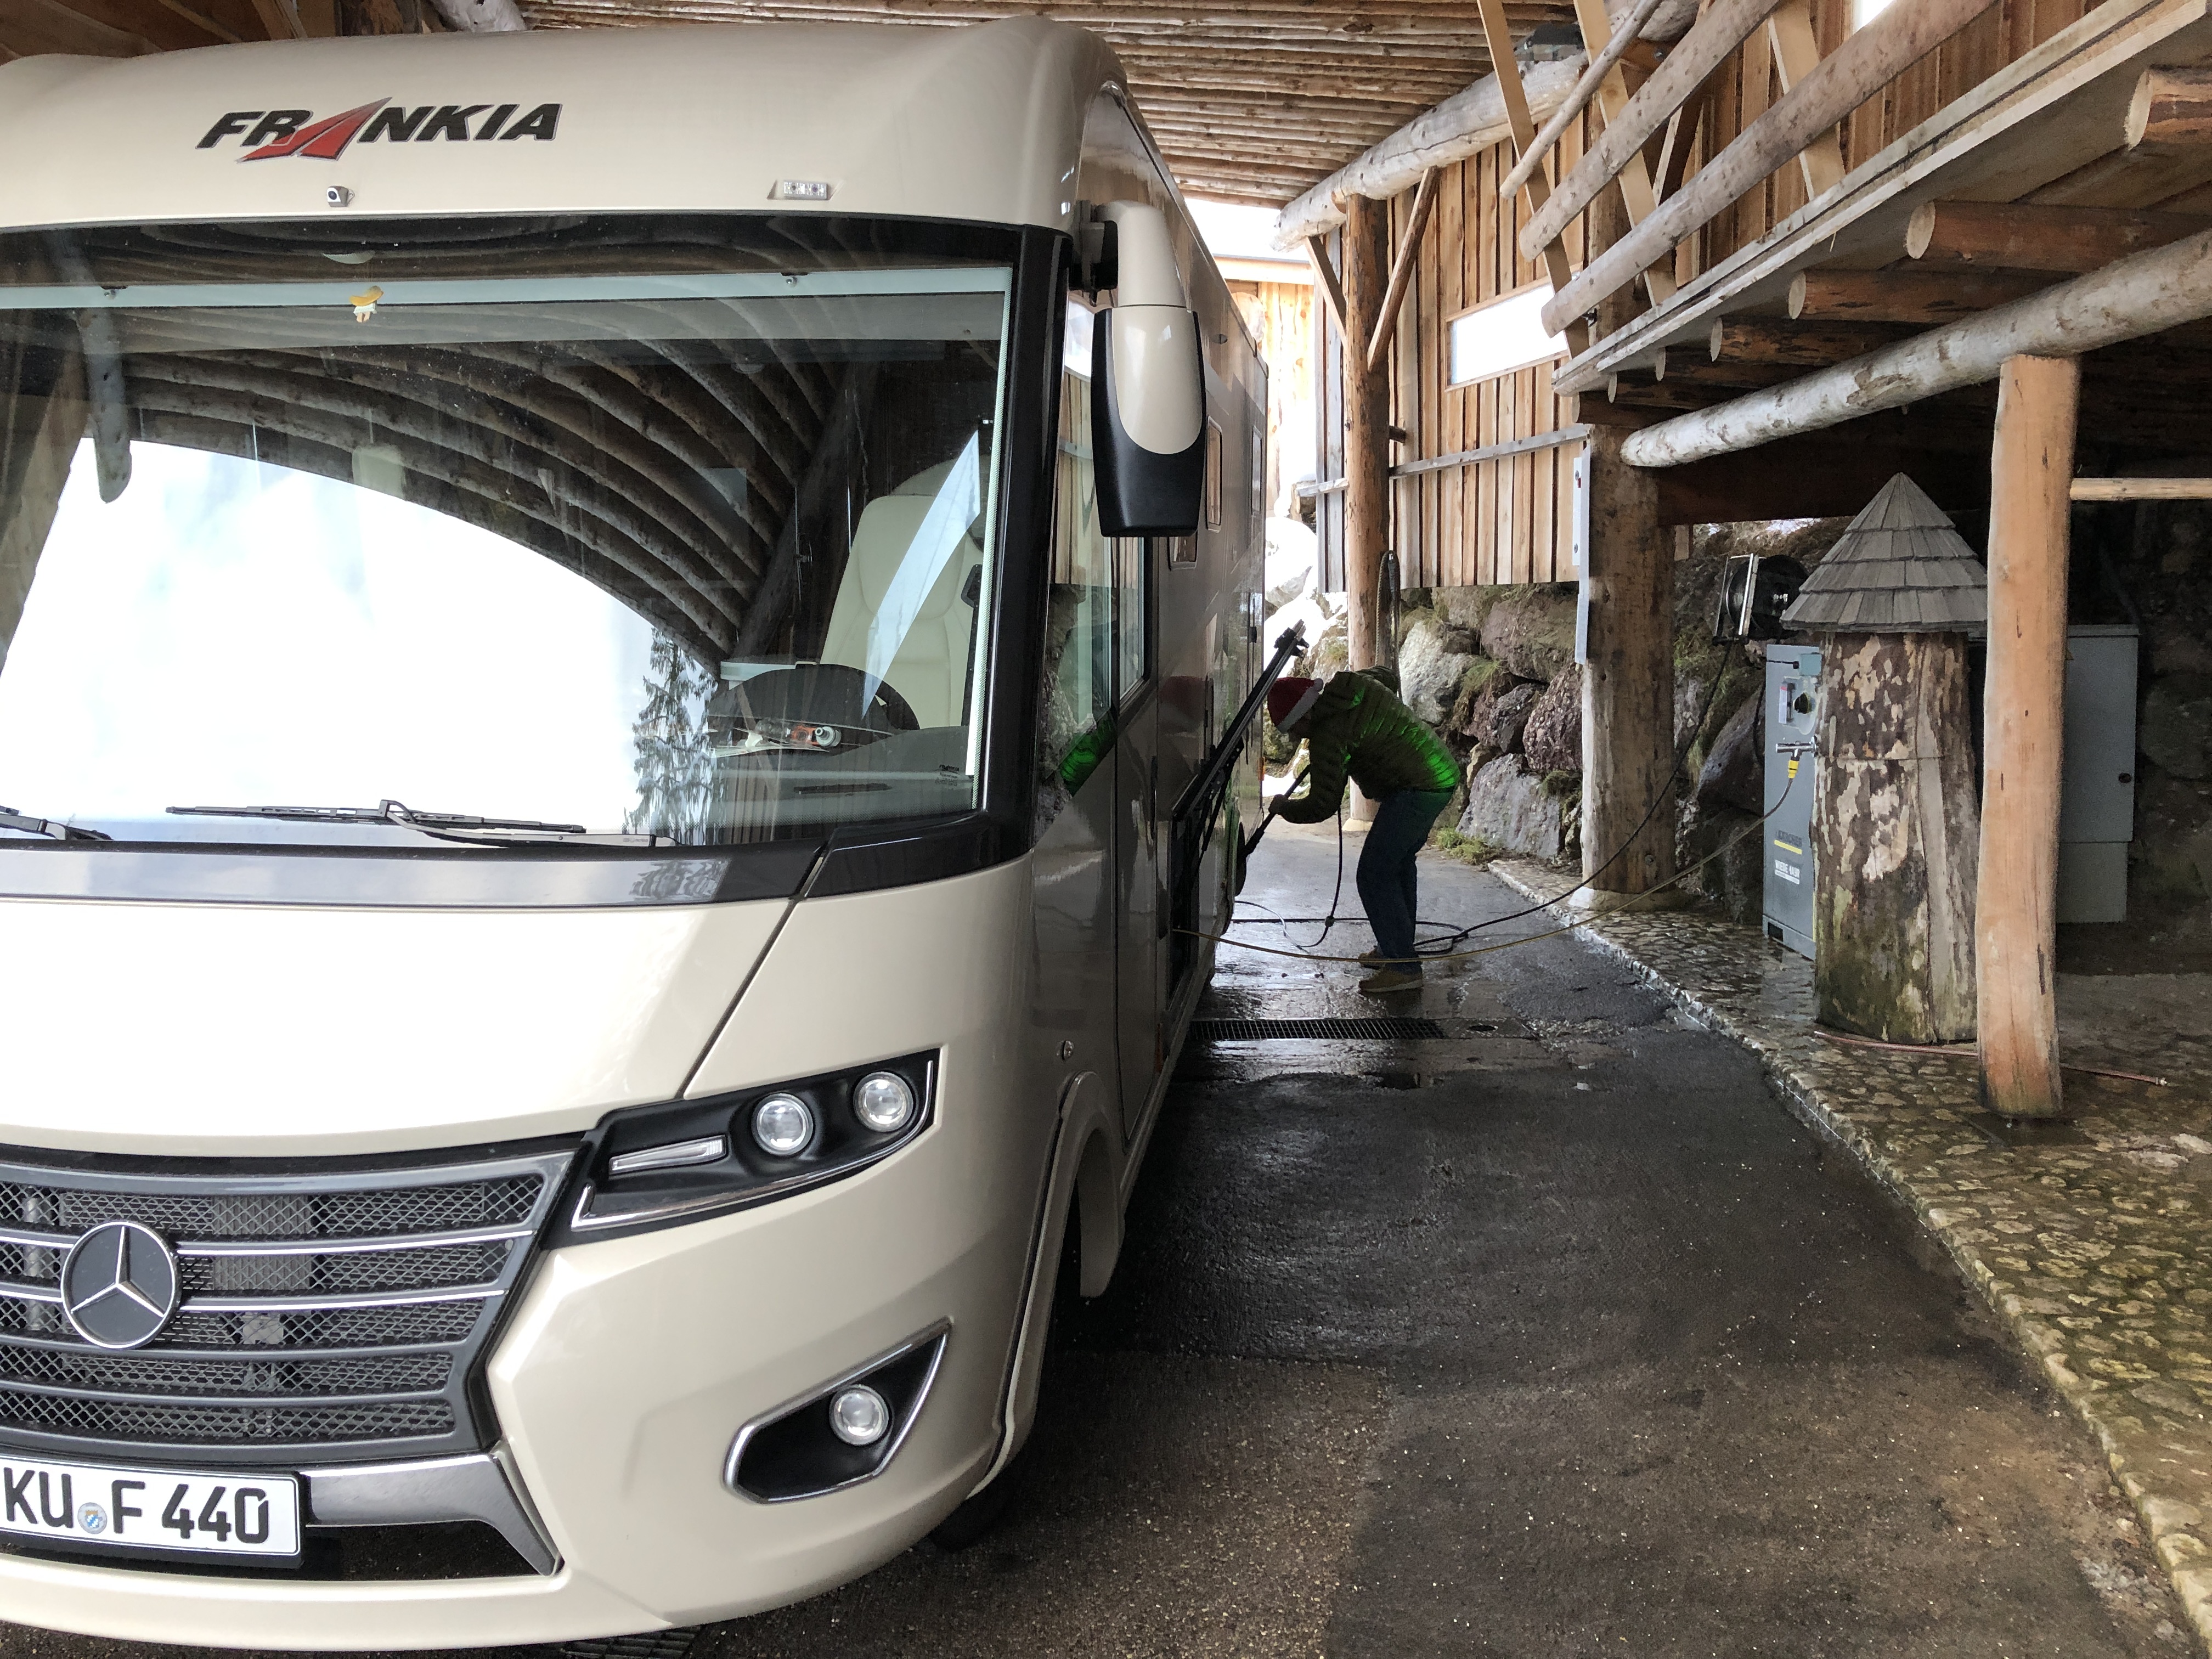 What to ask before signing a motorhome rental contract?